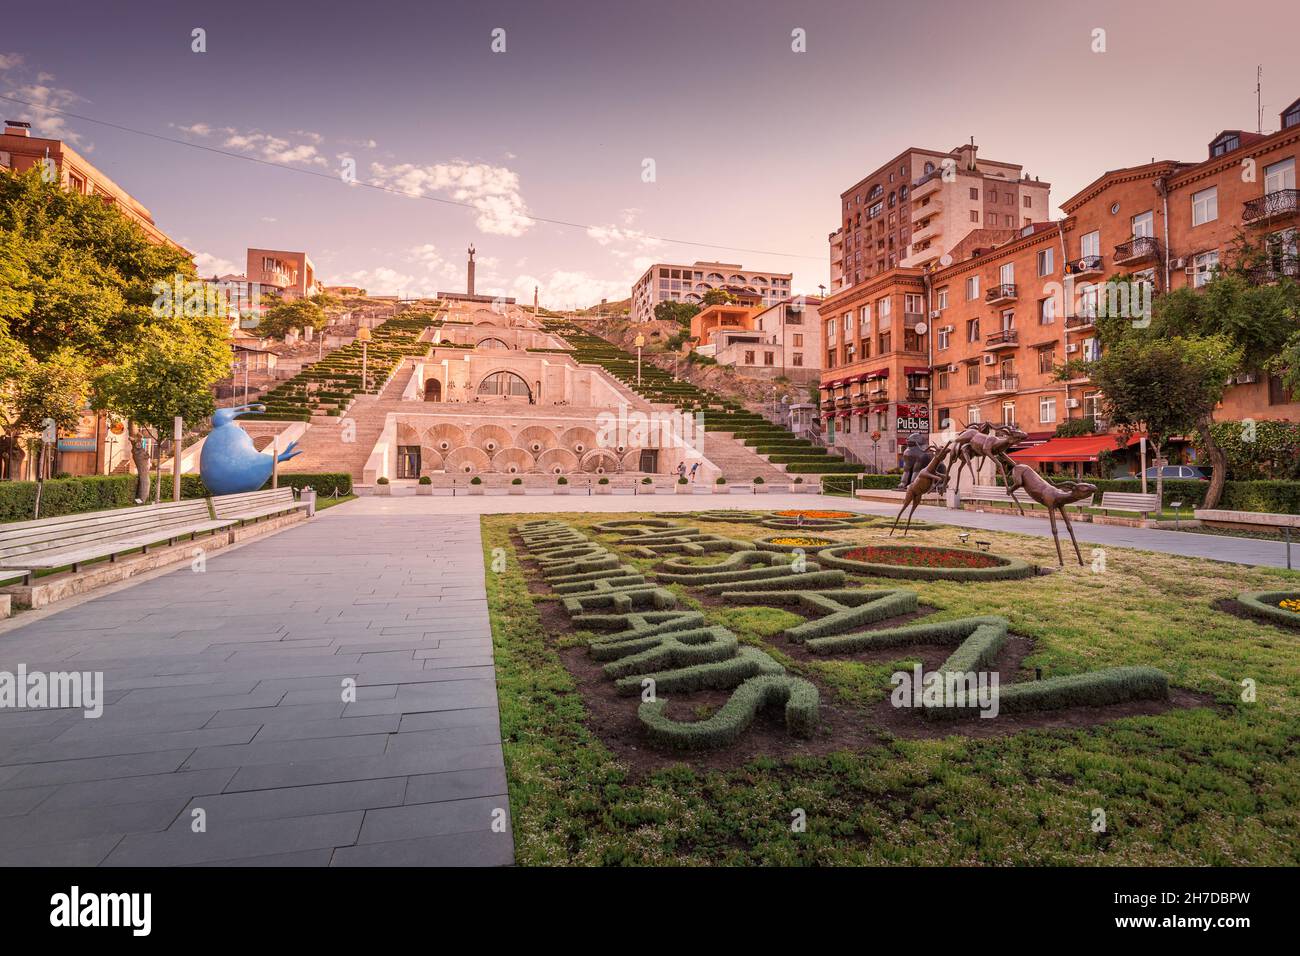 25 May 2021, Yerevan, Armenia: Open-air Cafesjian center of Arts and famous Cascade monument. Travel attractions and destinations in Yerevan Stock Photo